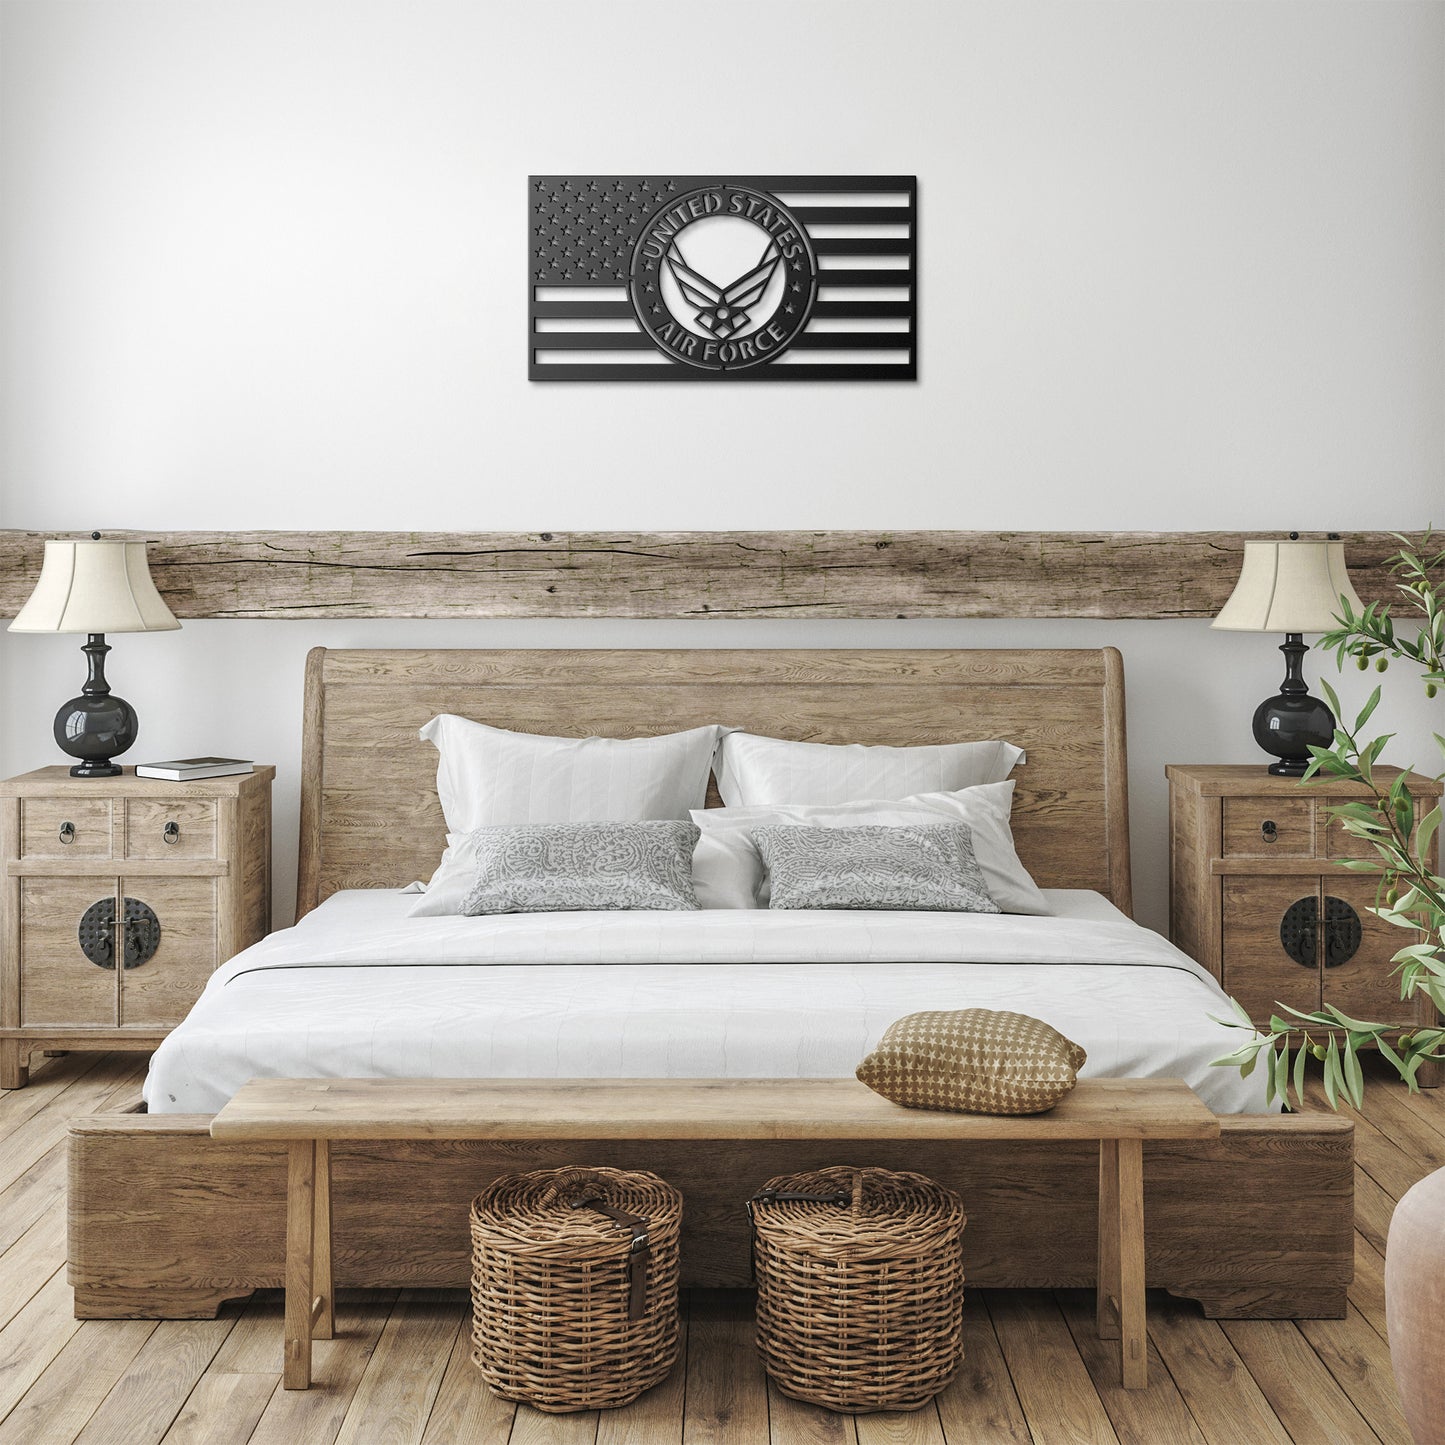 United States Air Force American Flag - Made in USA - US Military